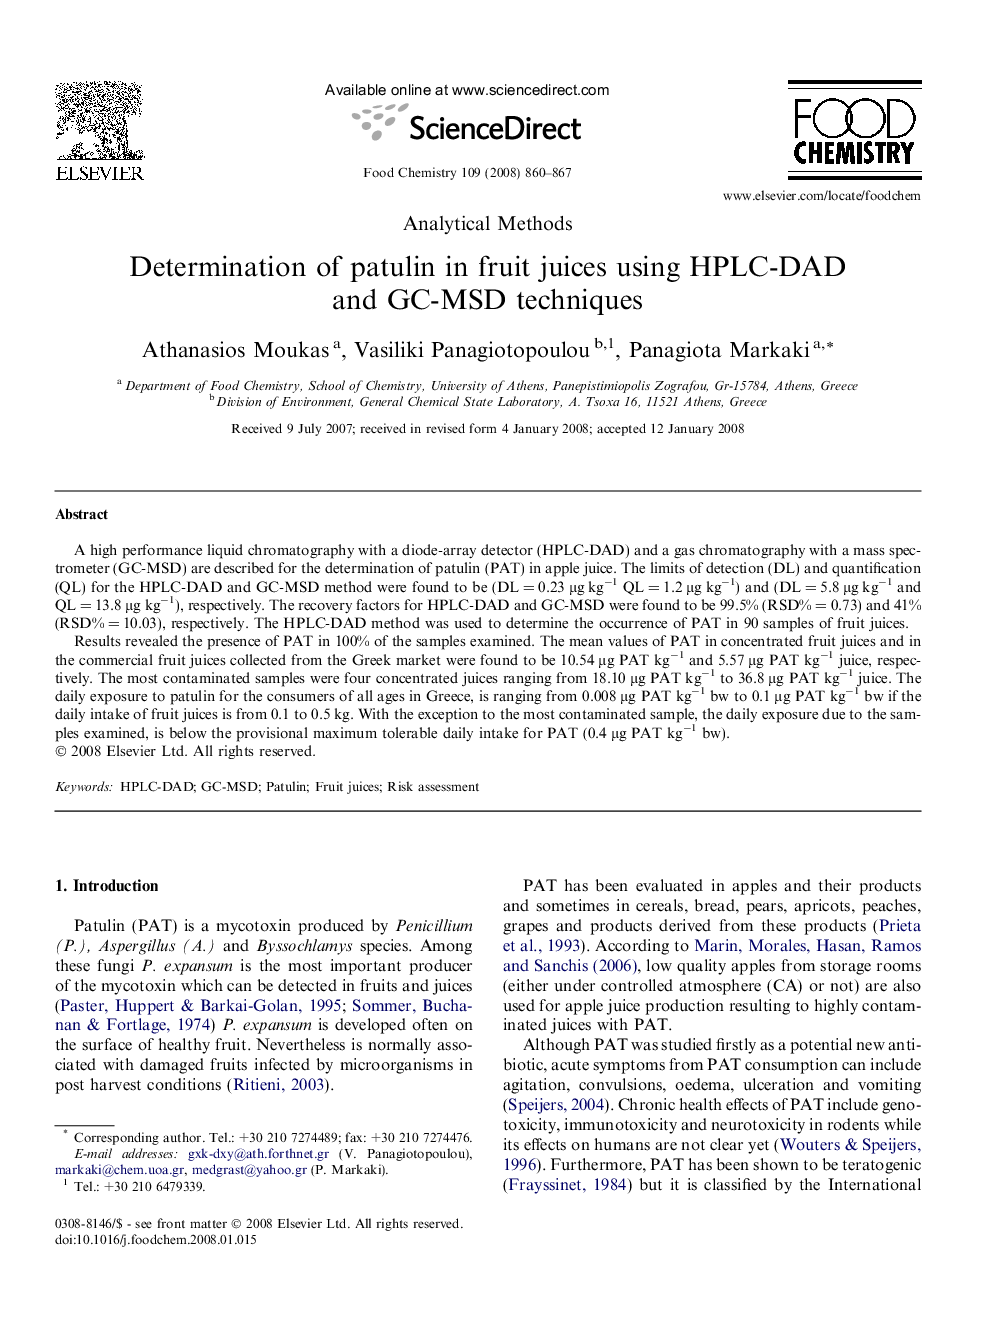 Determination of patulin in fruit juices using HPLC-DAD and GC-MSD techniques